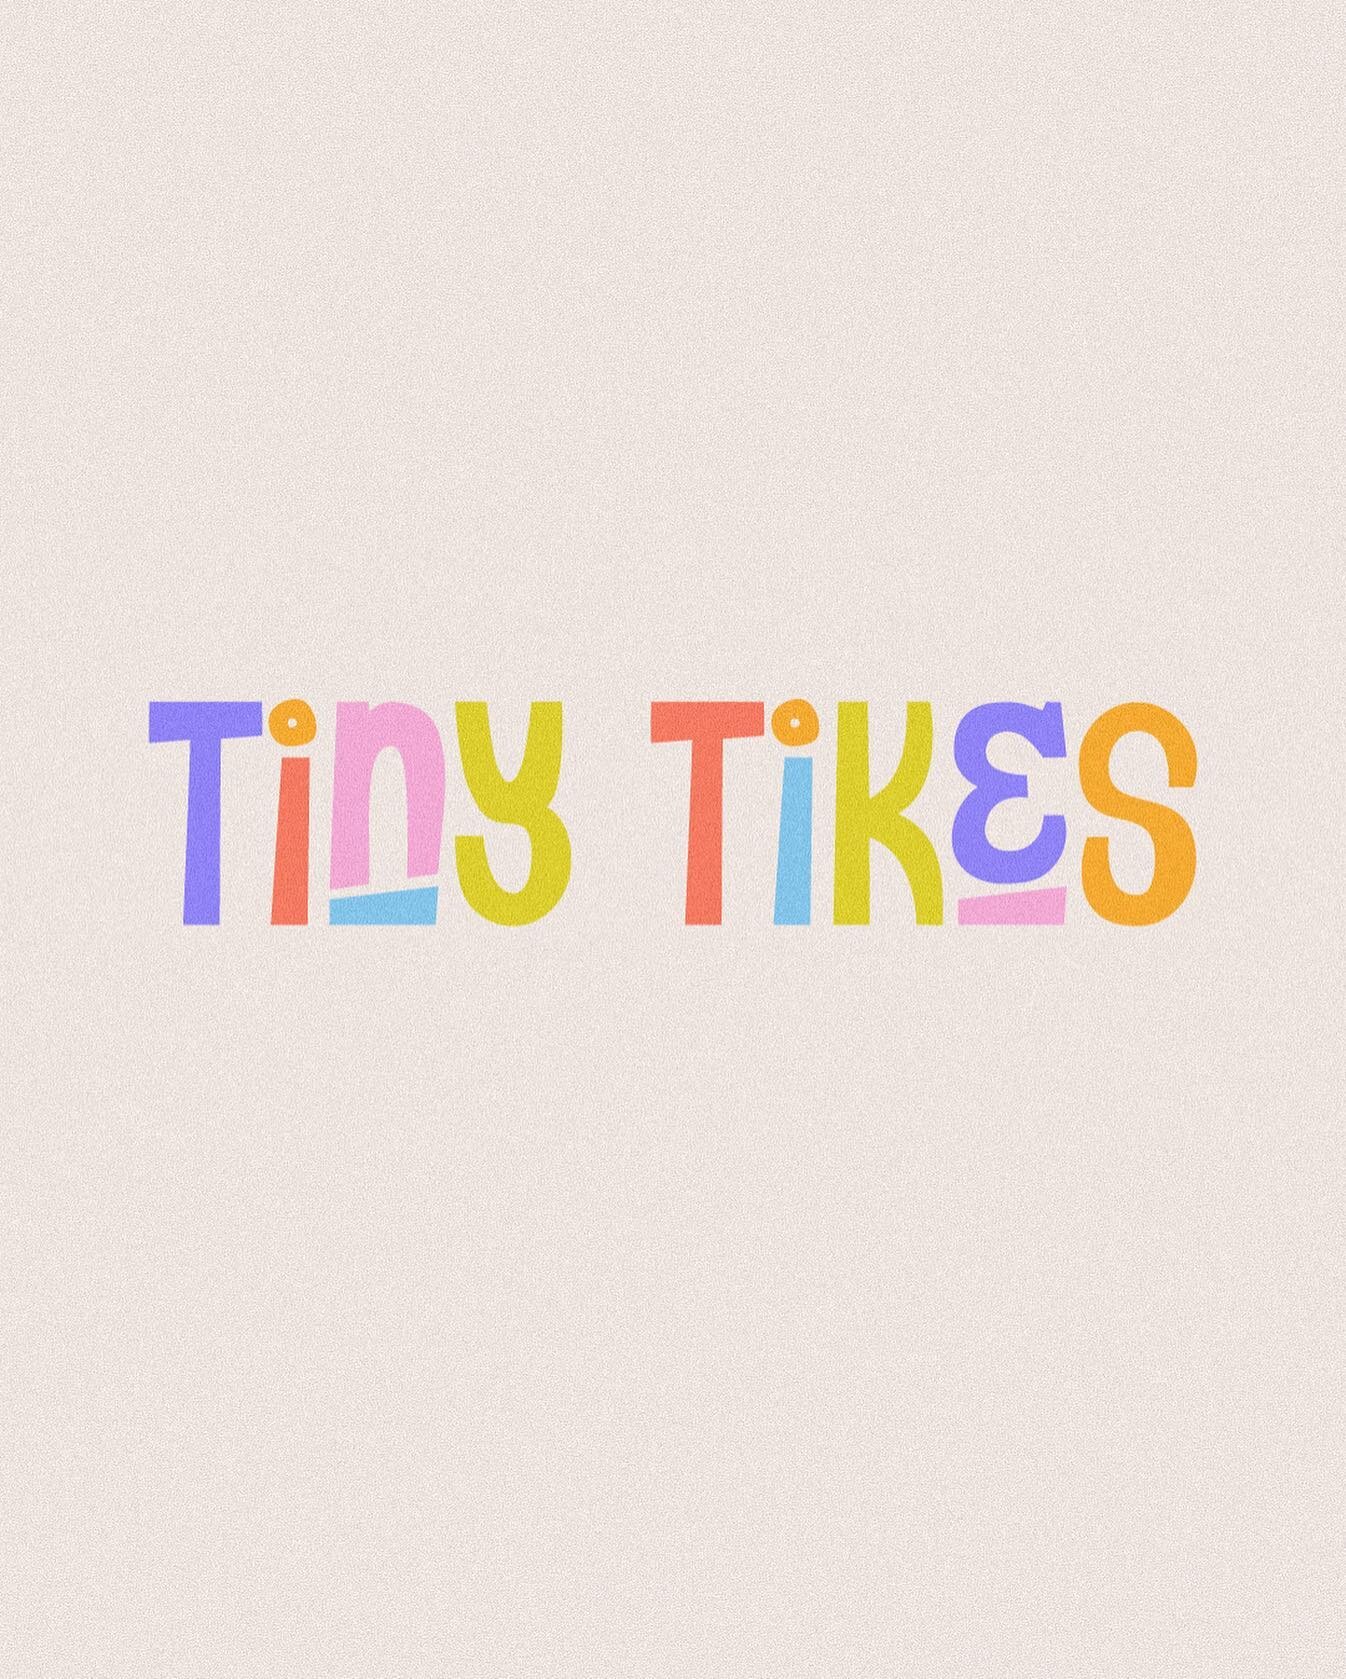 and that&rsquo;s a wrap on Tiny Tikes! such a playful brand 🧸

#tbctinytikes @briefclub